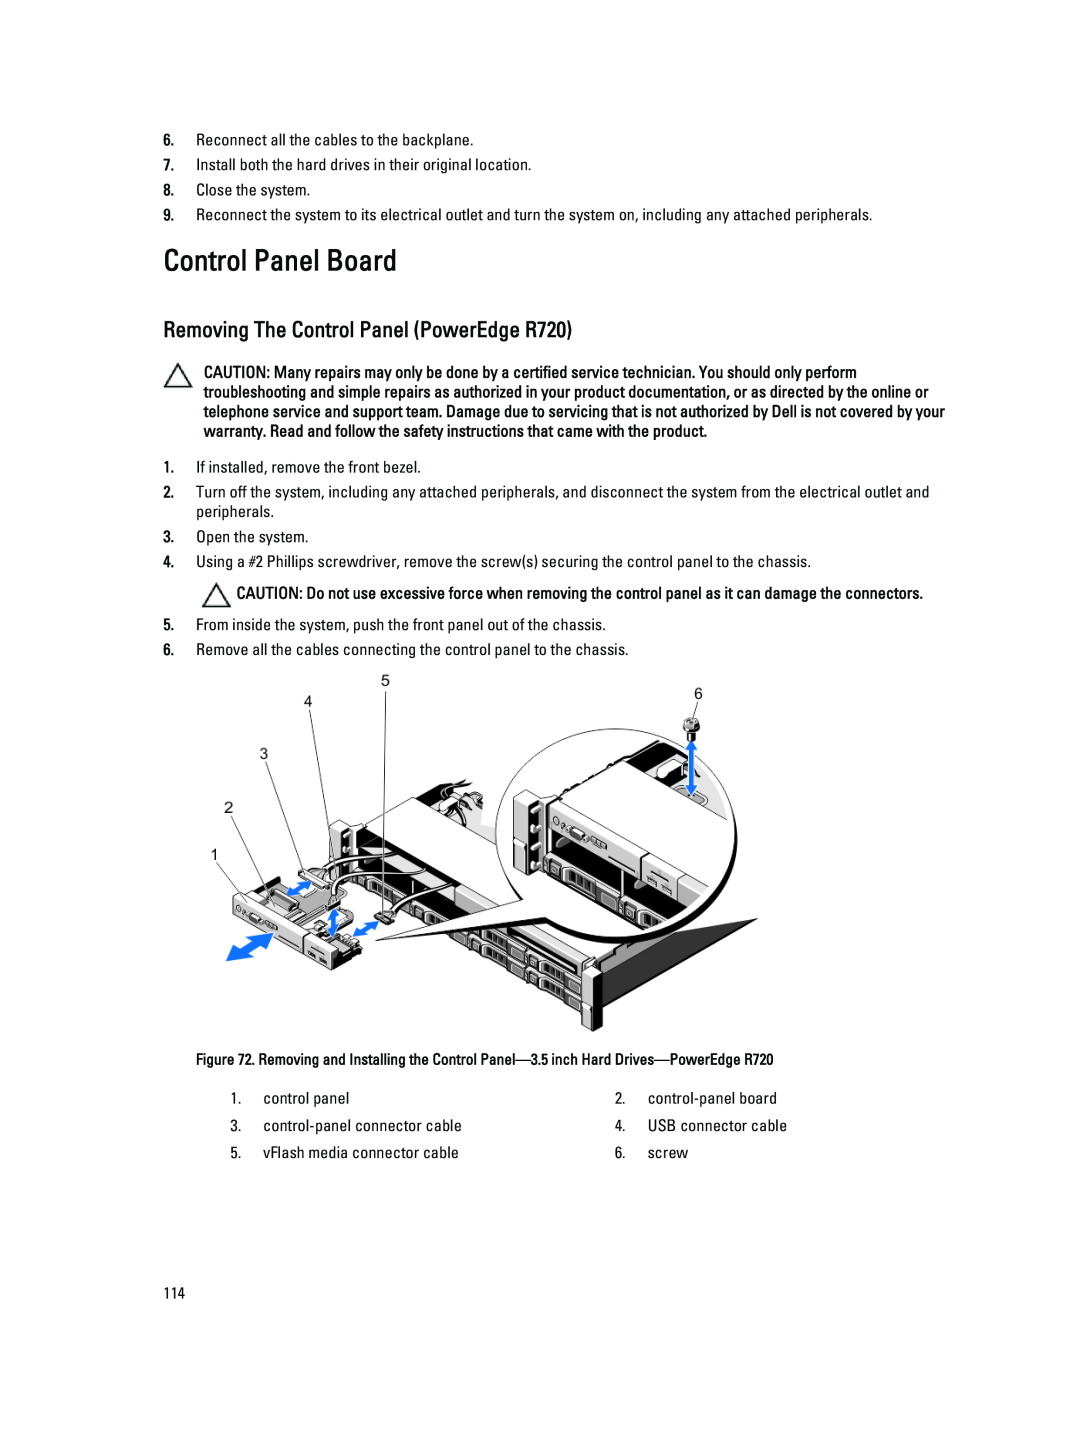 Dell R720XD owner manual Control Panel Board, Removing The Control Panel PowerEdge R720 